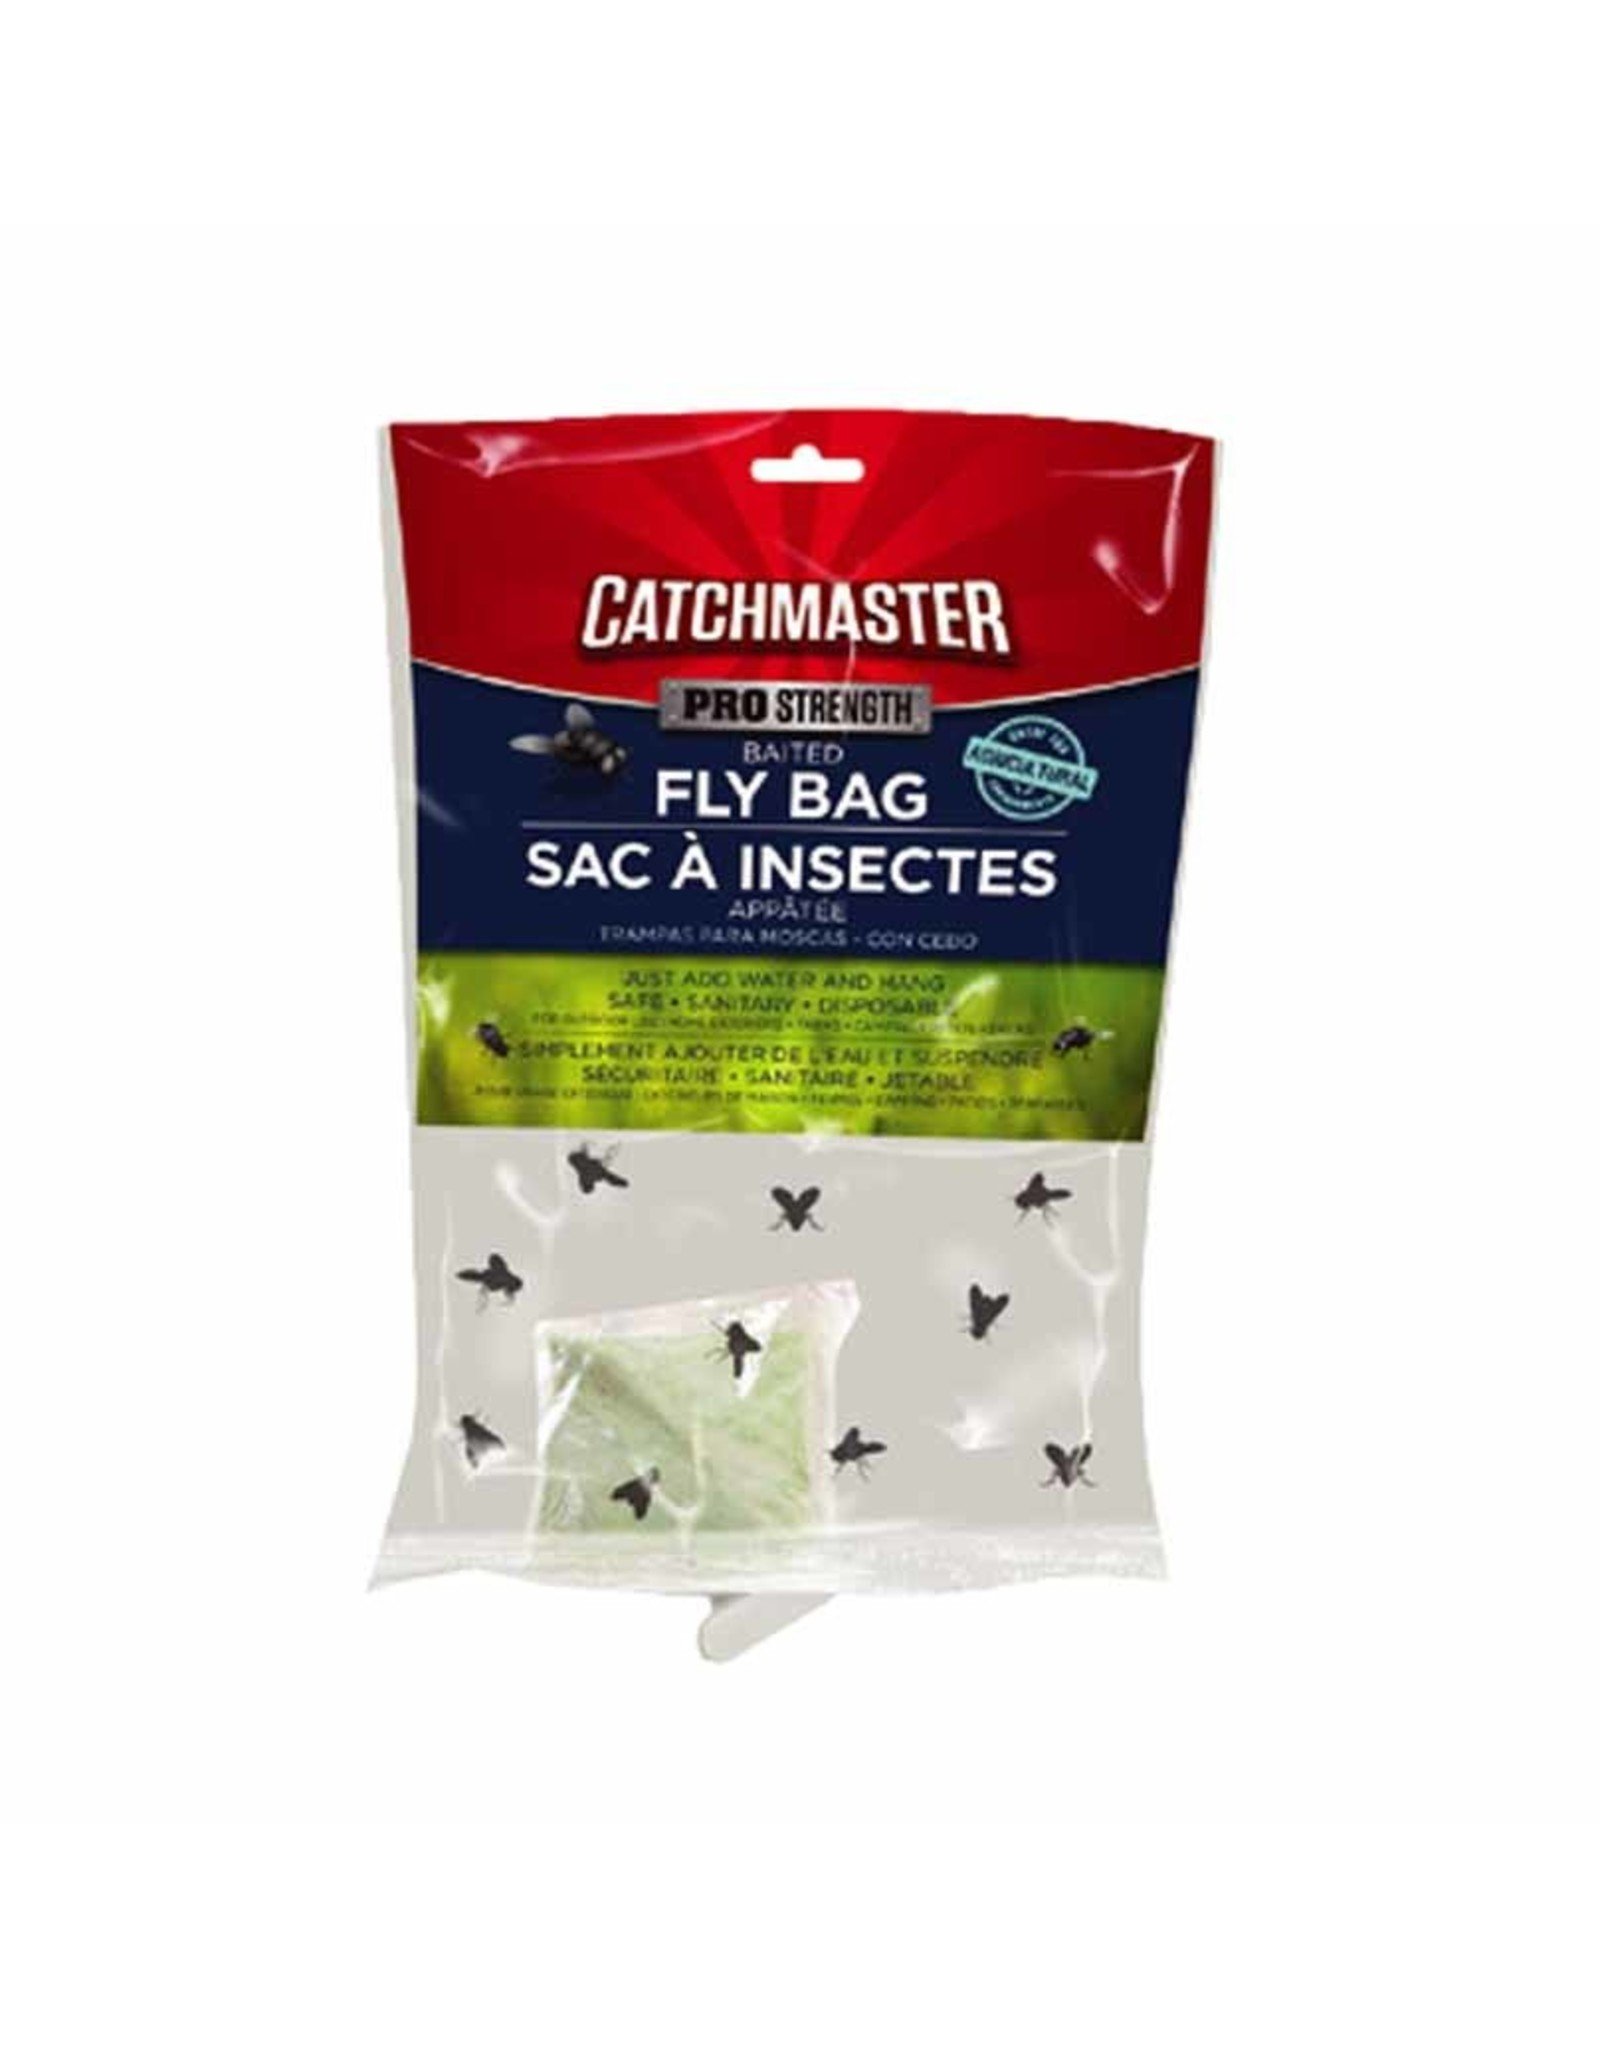 Catchmaster Catchmaster Fly Bag Trap